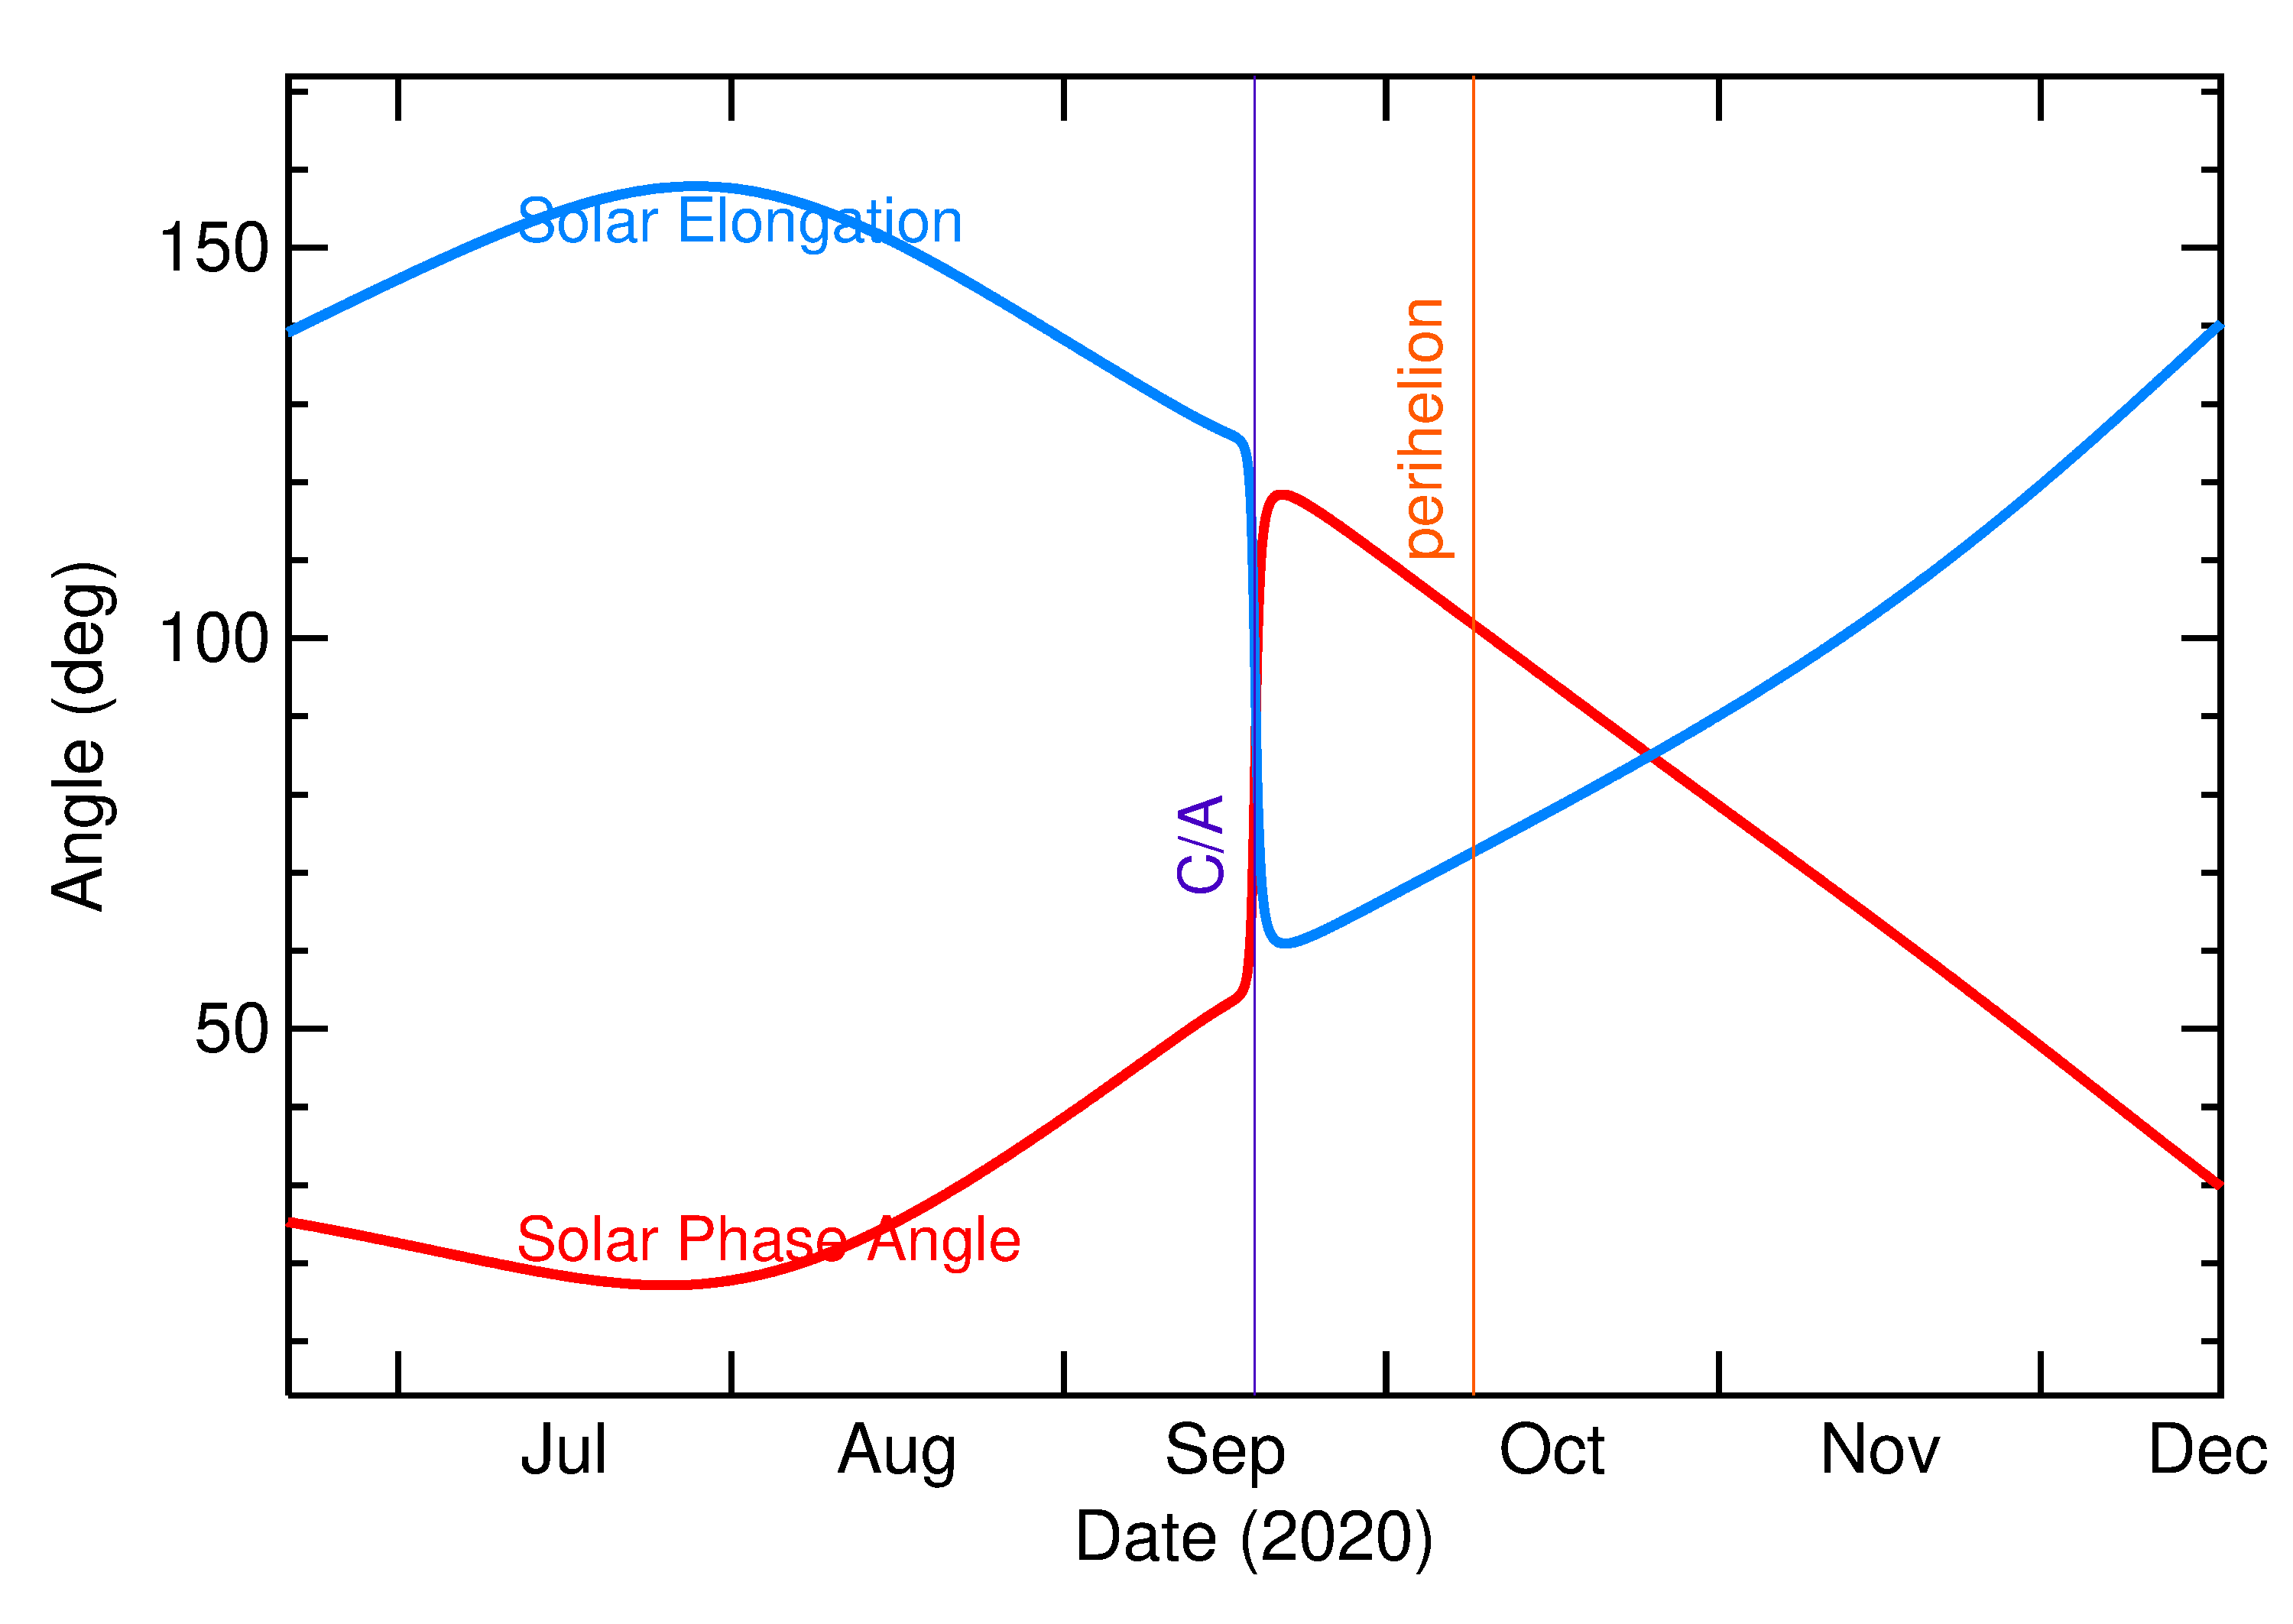 Solar Elongation and Solar Phase Angle of 2020 RZ6 in the months around closest approach